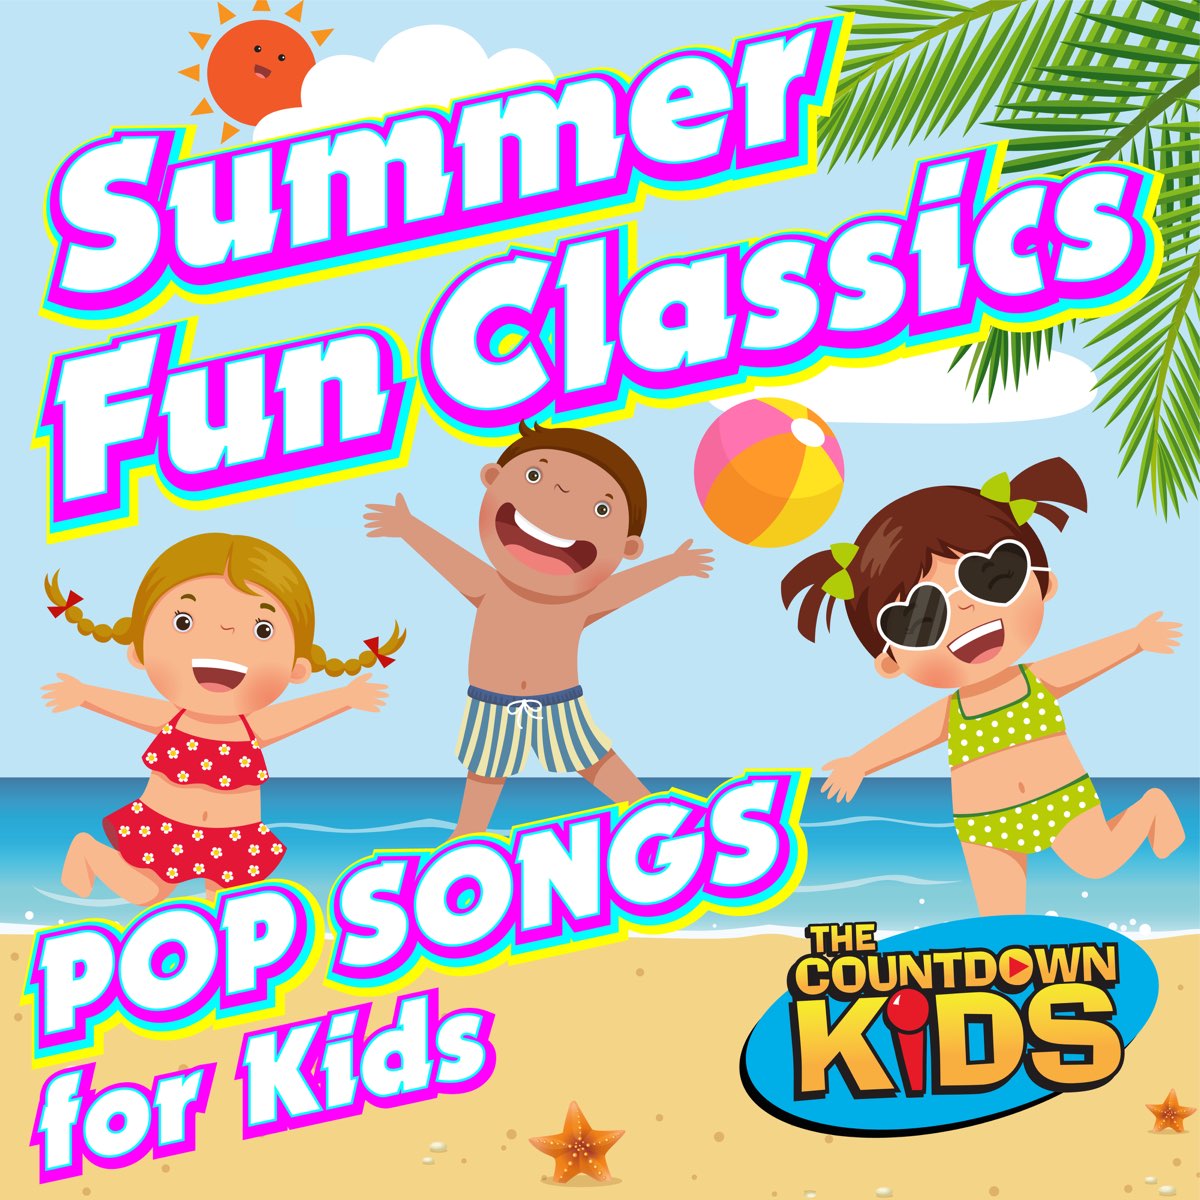 Summer Fun Classics: Pop Songs for Kids by The Countdown Kids on Apple Music